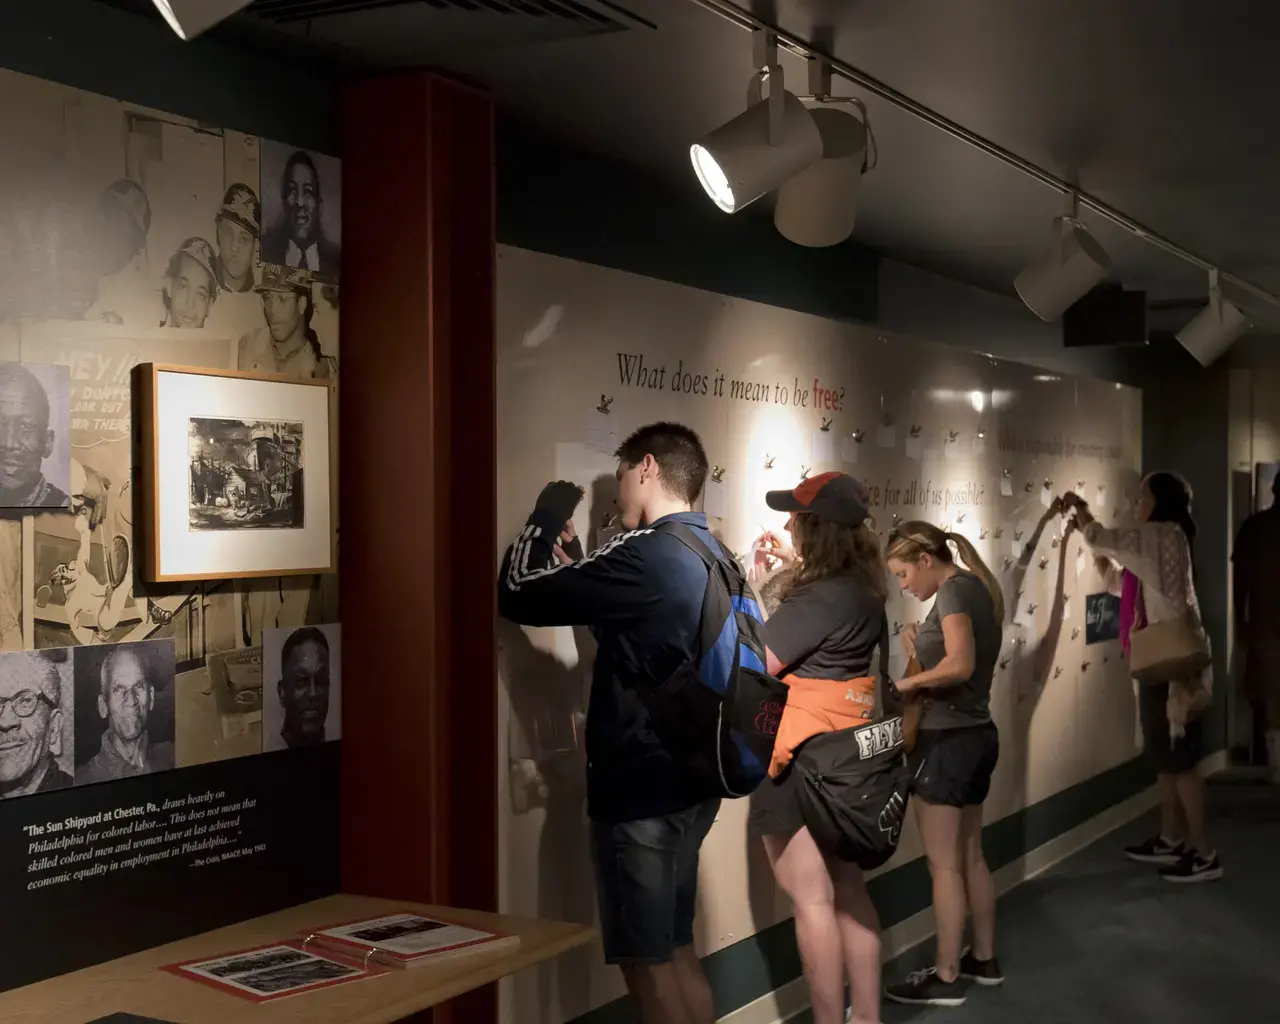 Visitors engage with the exhibit "Tides of Freedom: African Presence on the Delaware River" at the Independence Seaport Museum.